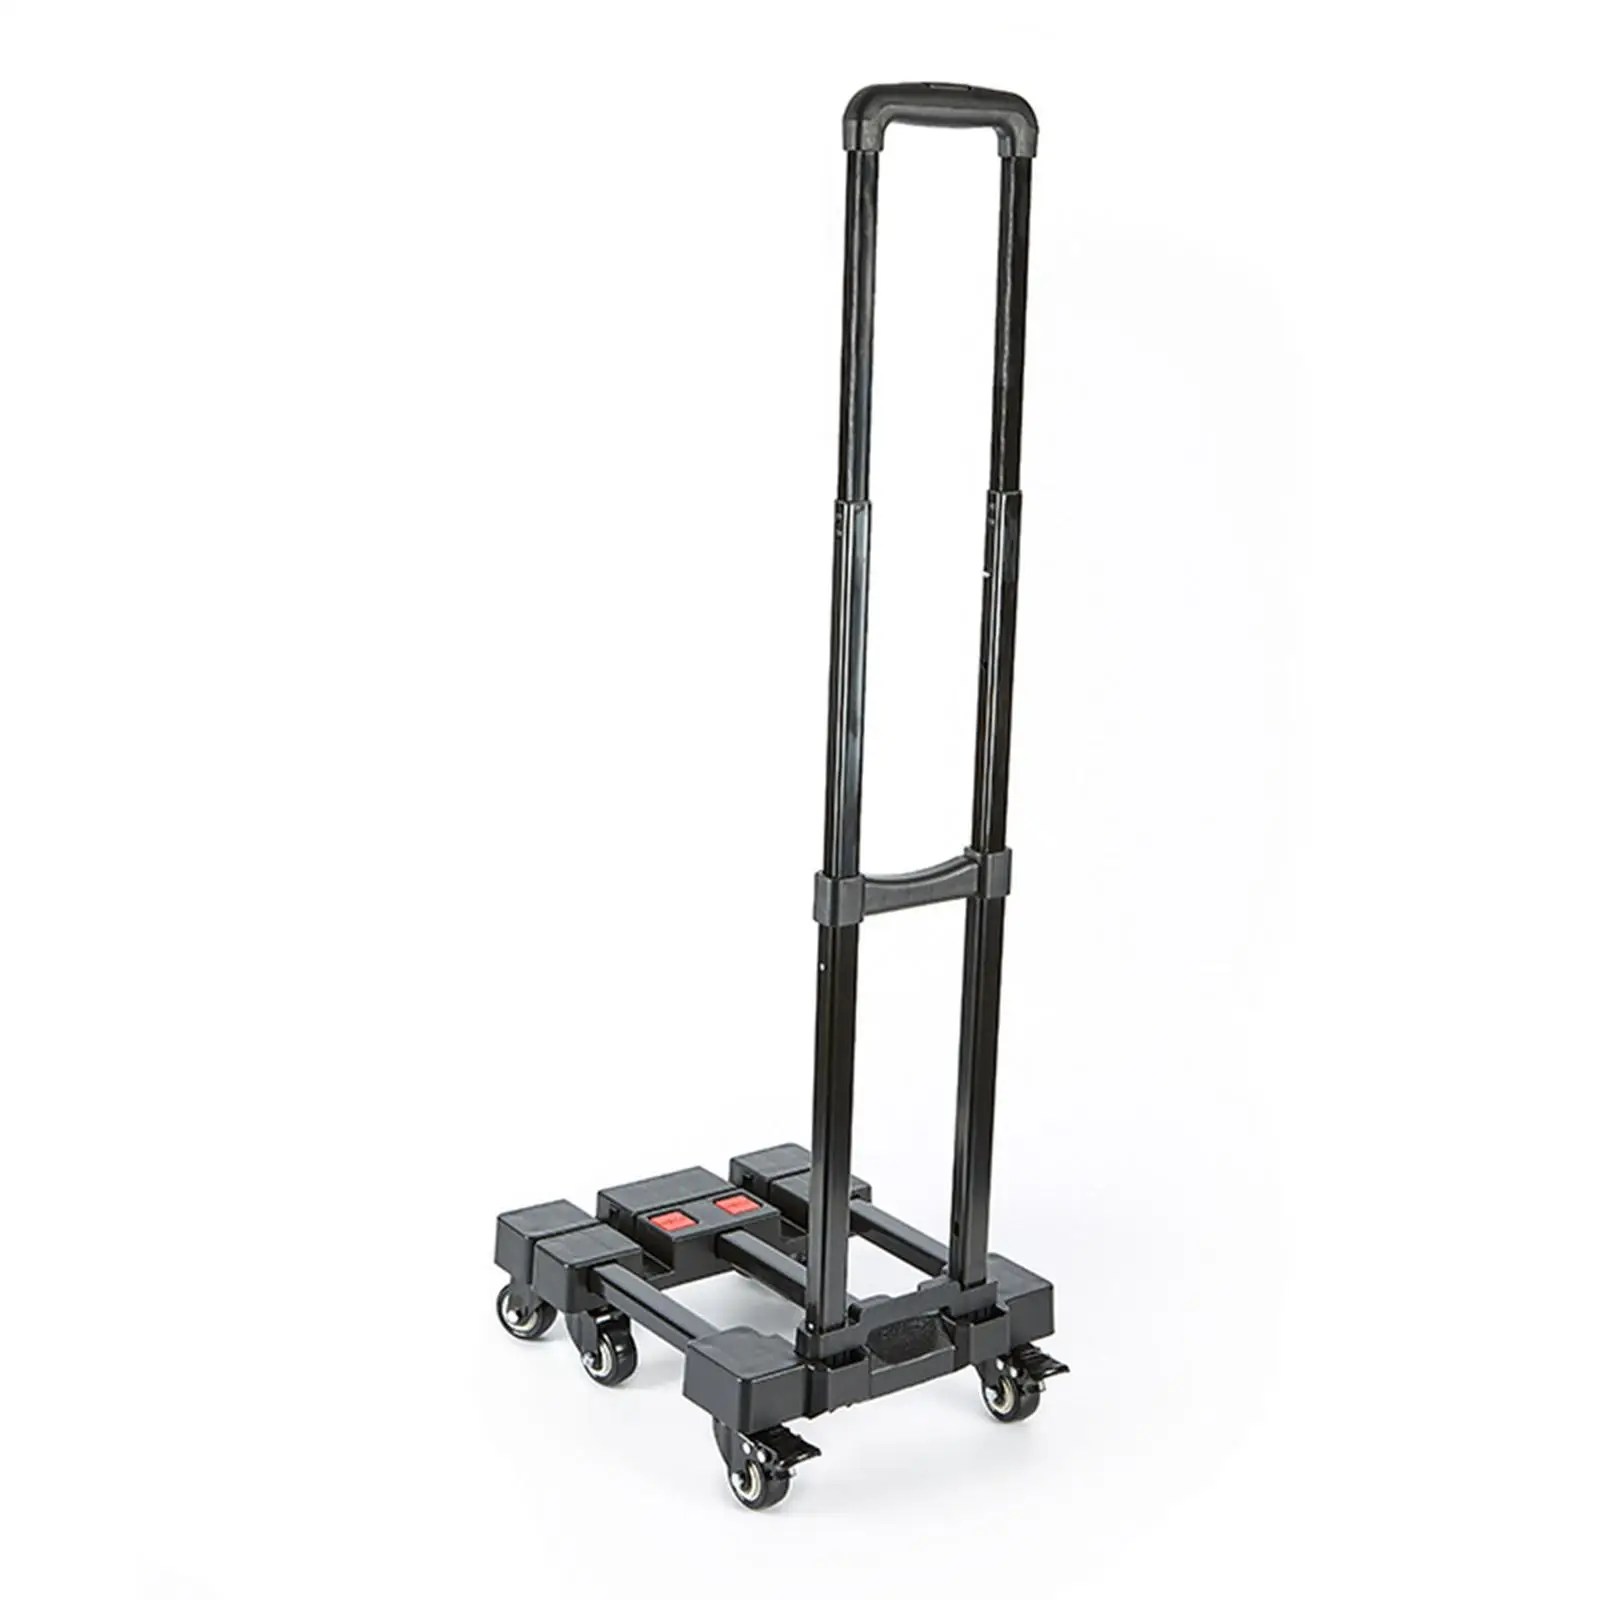 Folding Hand Truck Sturdy Collapsible Compact Luggage Trolley for Moving Outdoor Houshold Warehouse 100kg (220lb) Load Capacity